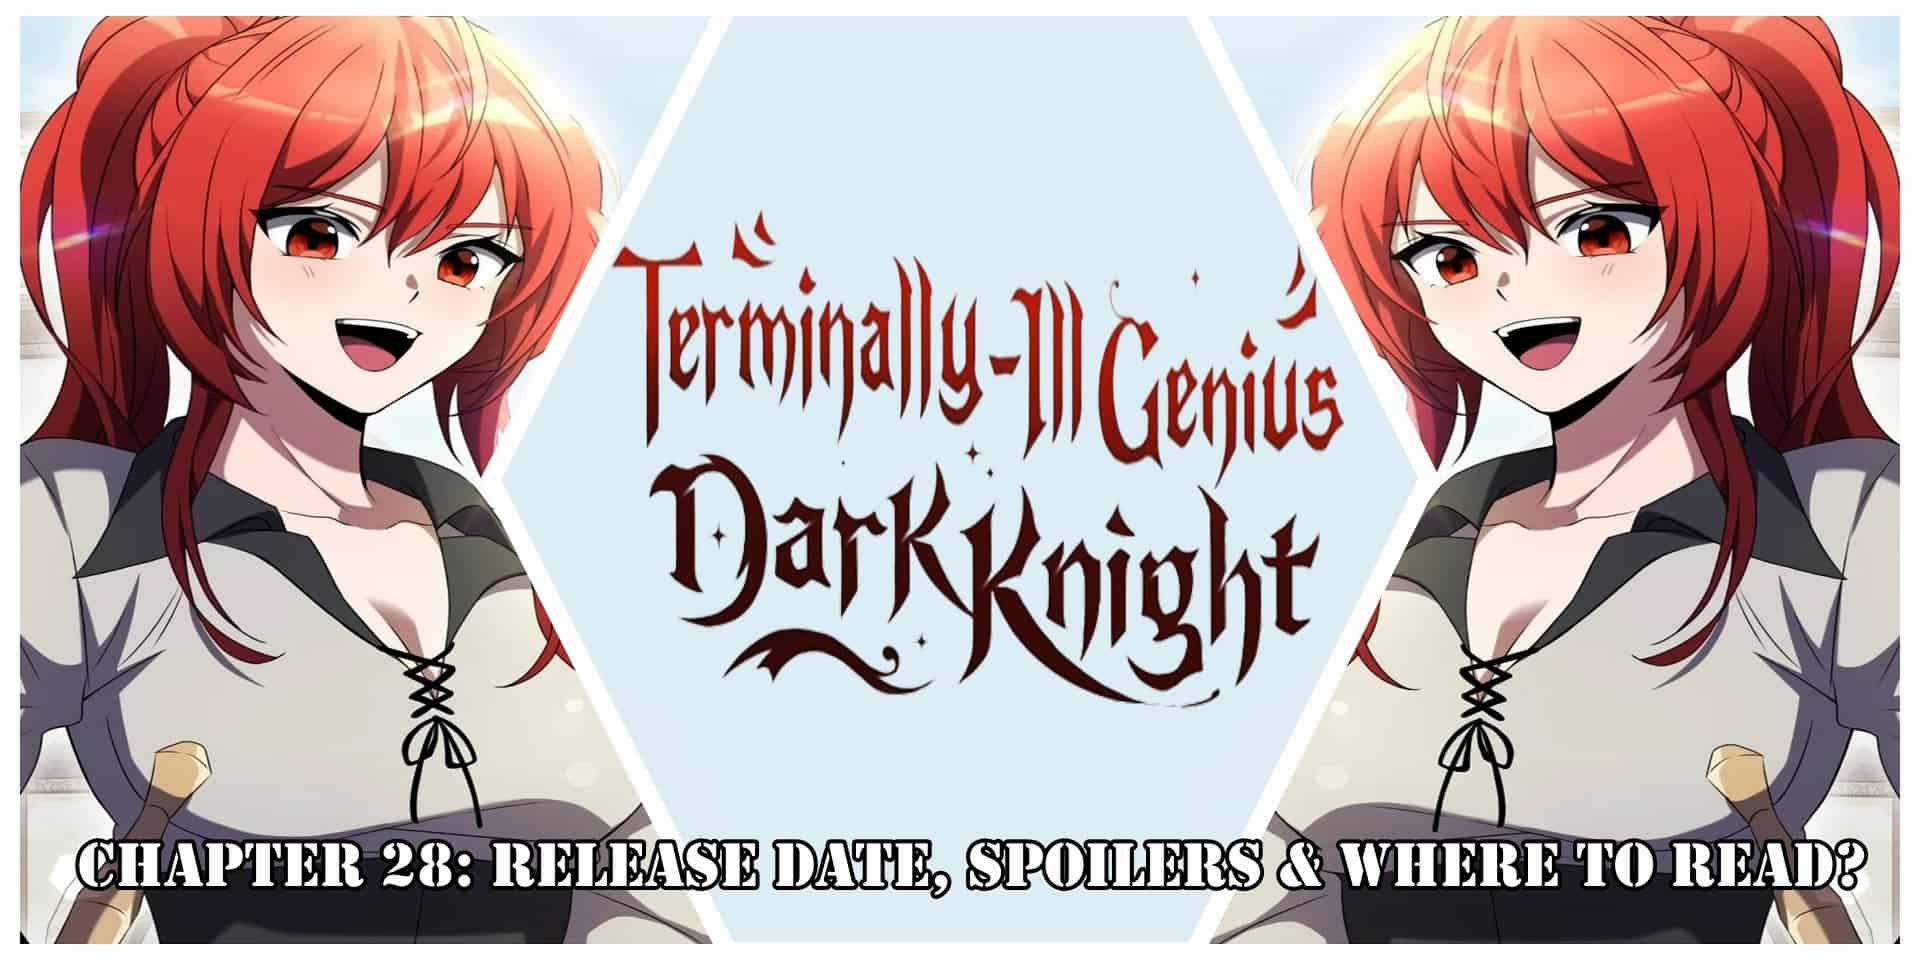 Terminally-Ill Genius Dark Knight Chapter 28: Release Date, Spoilers & Where to Read?